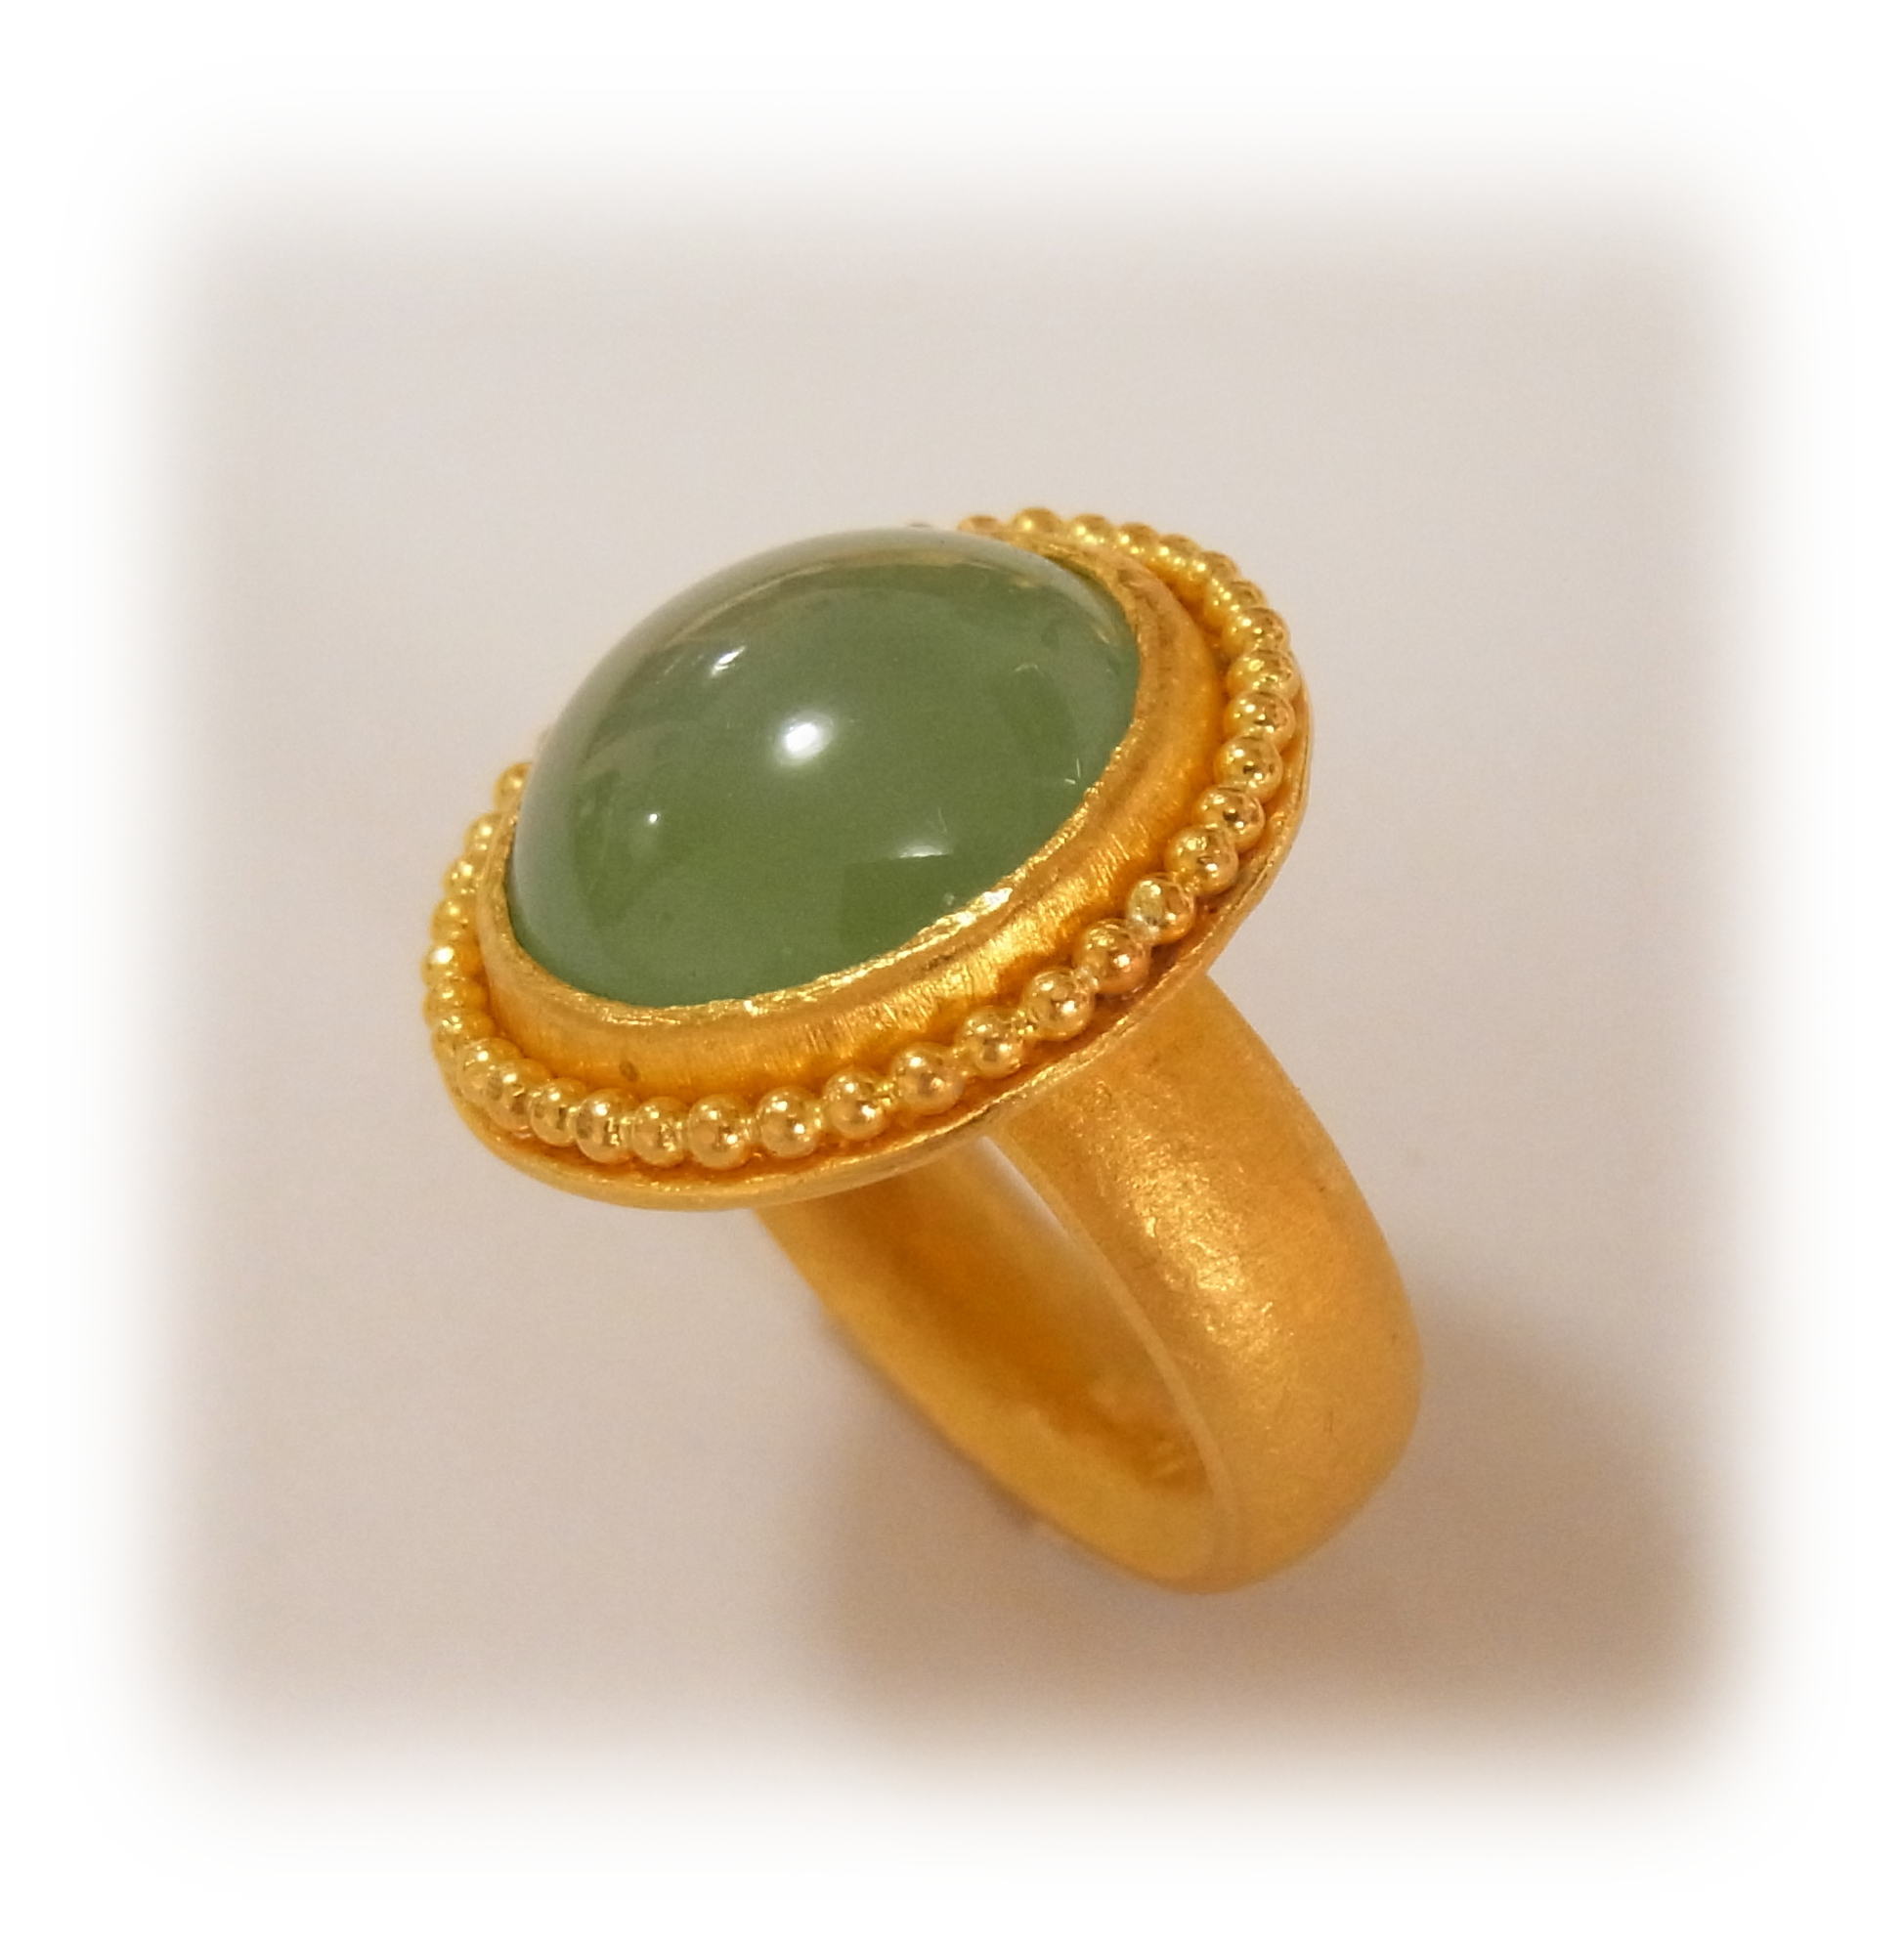 Round-cabochon green Jadeite ring with gold granulation (seen from the side)